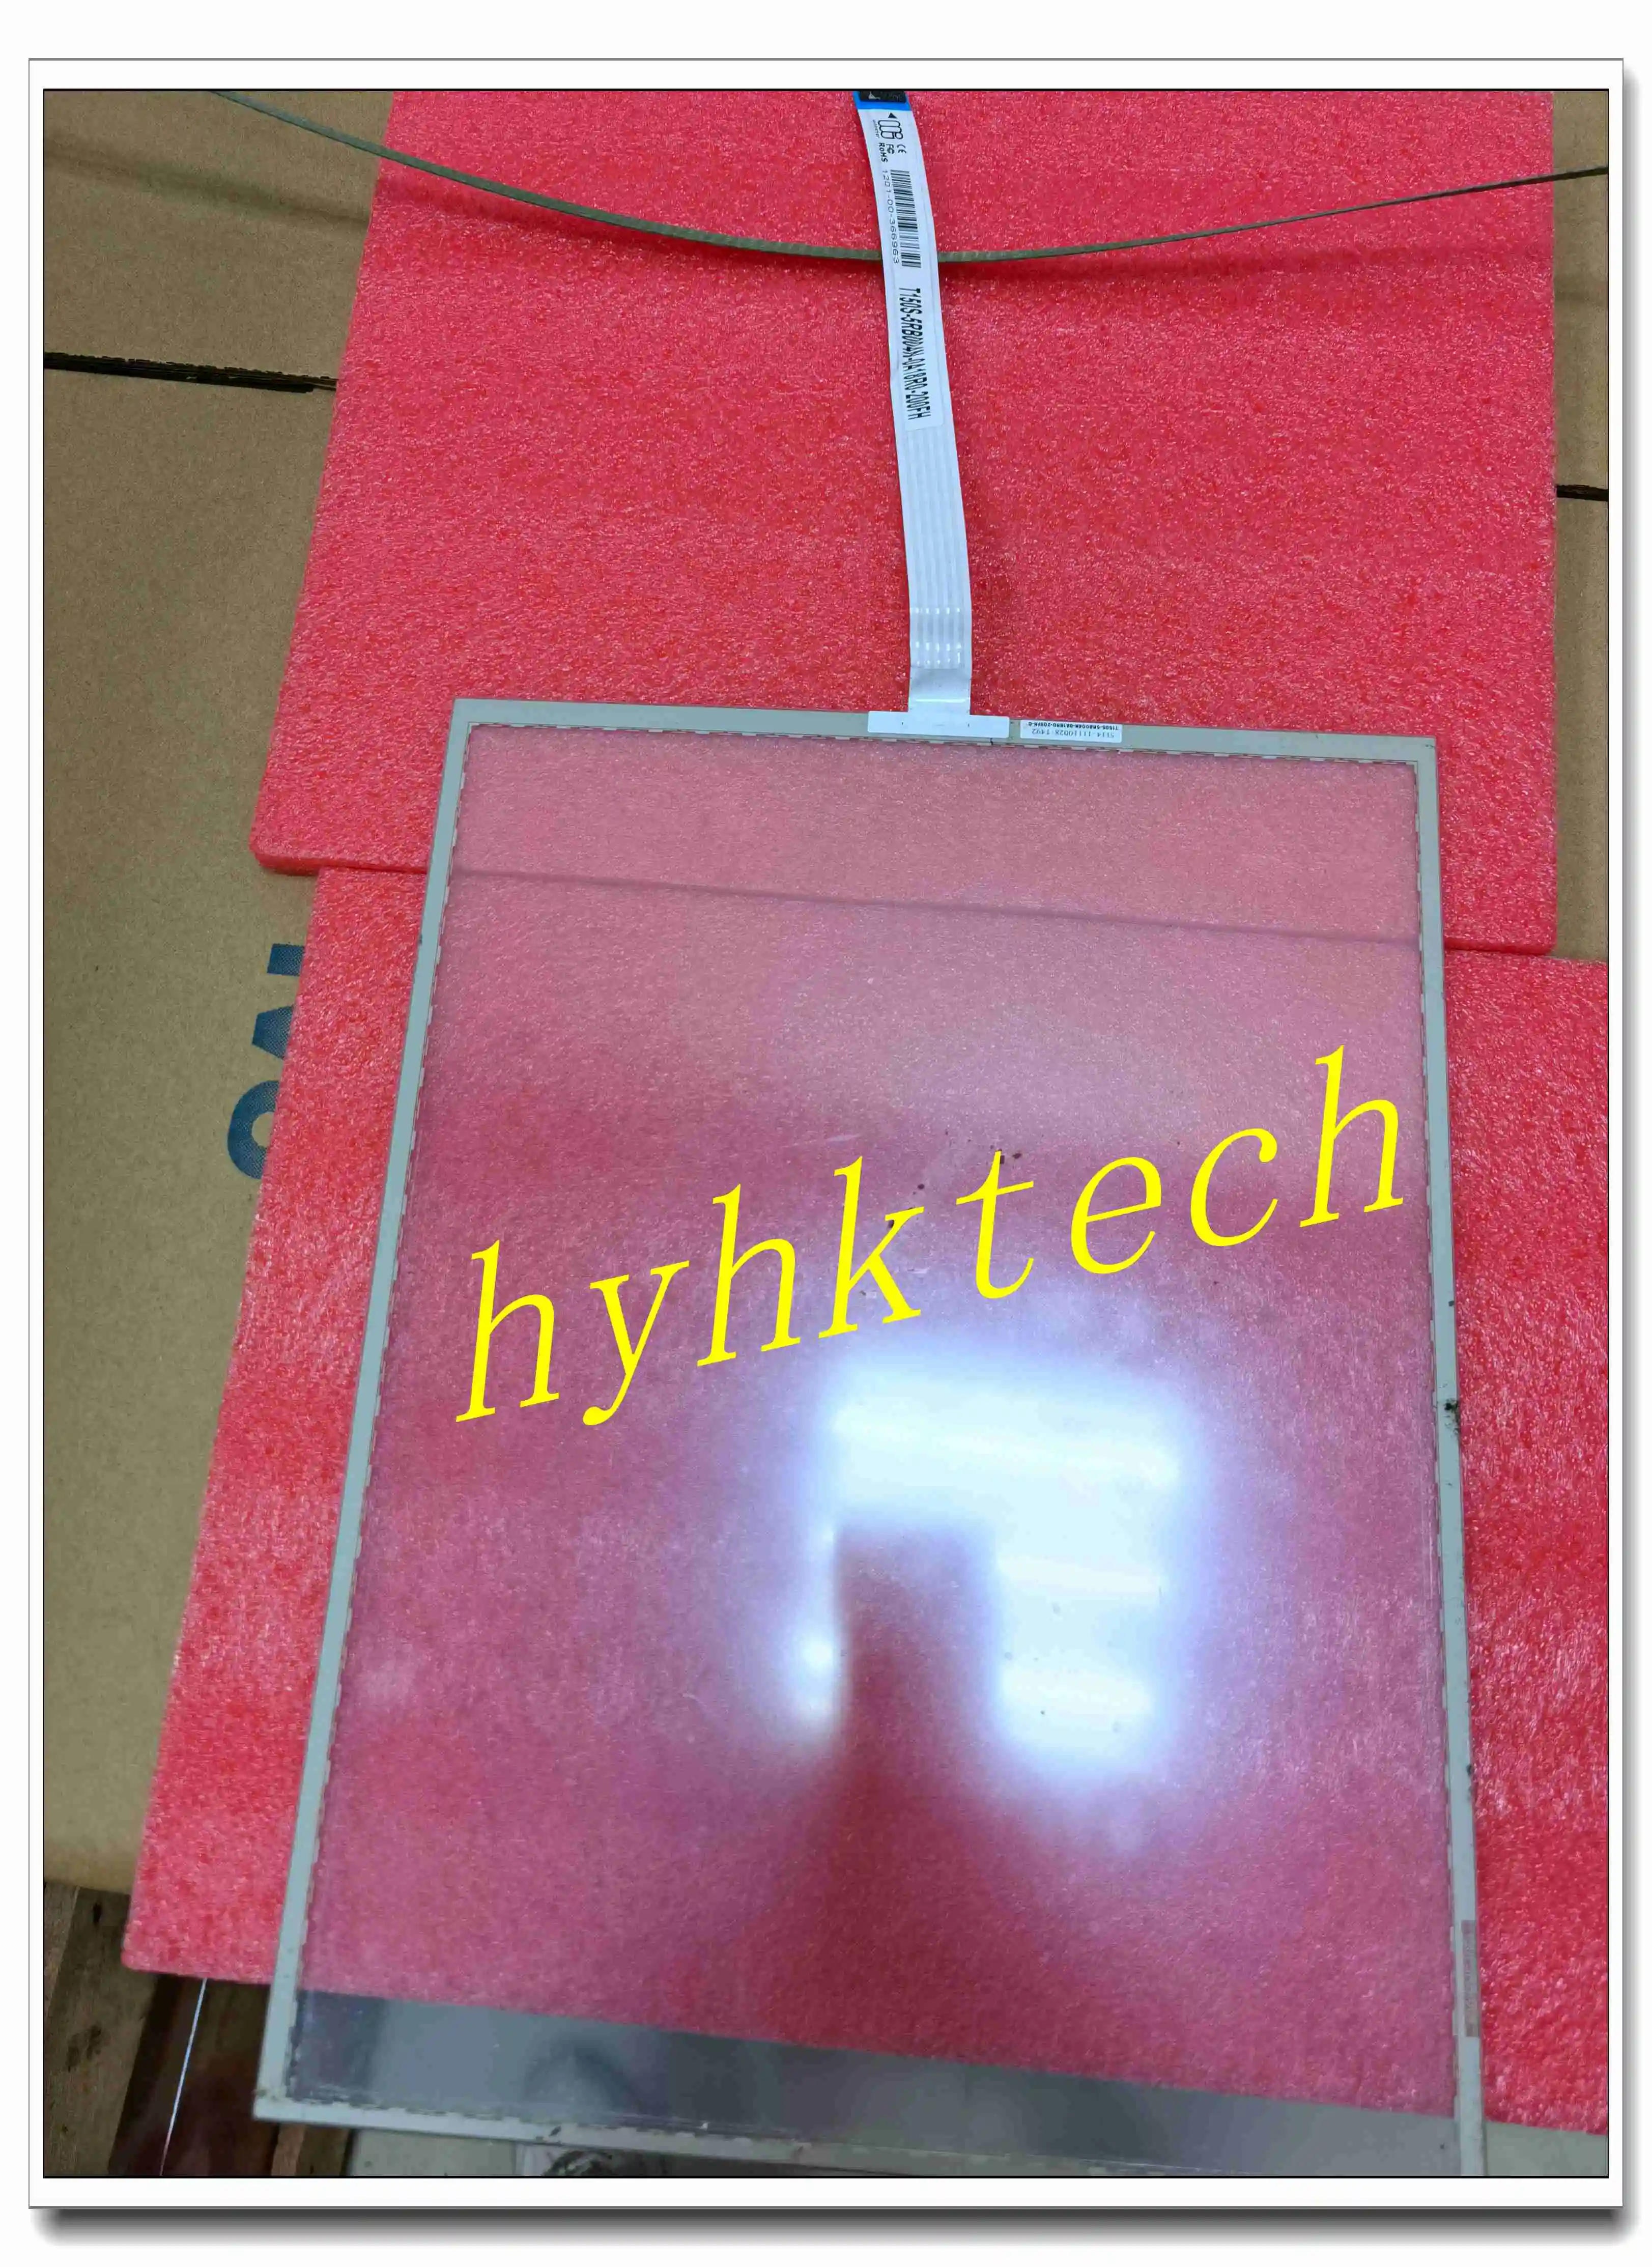 T150S-5RB004N-0A18R0-200FH-0  5114-11110028-1492 Original  15.0 inch 5 wires touch panel